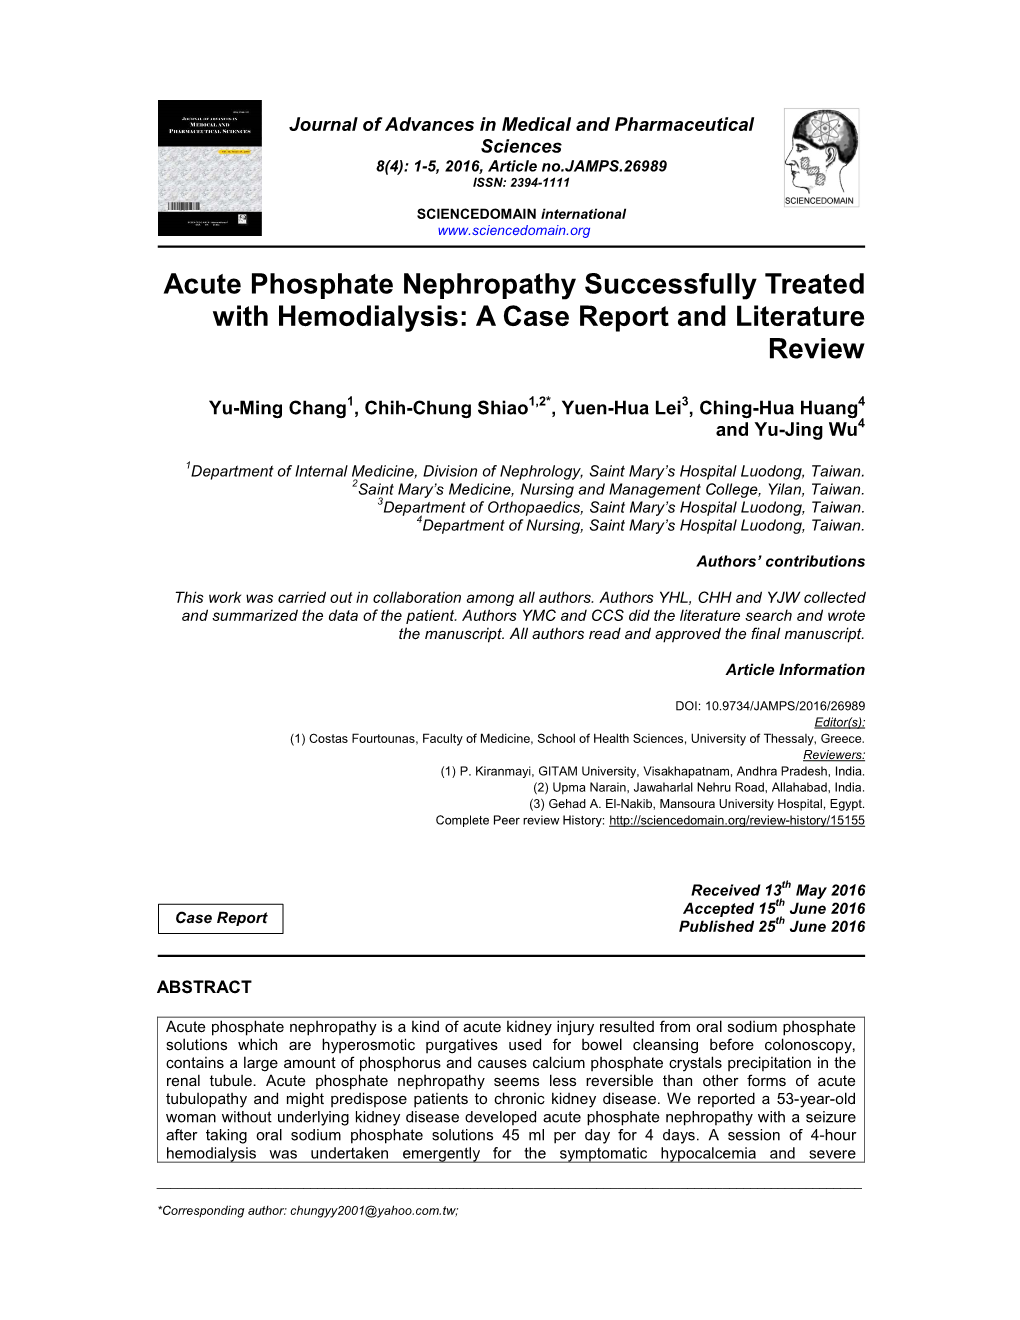 Acute Phosphate Nephropathy Successfully Treated with Hemodialysis: a Case Report and Literature Review